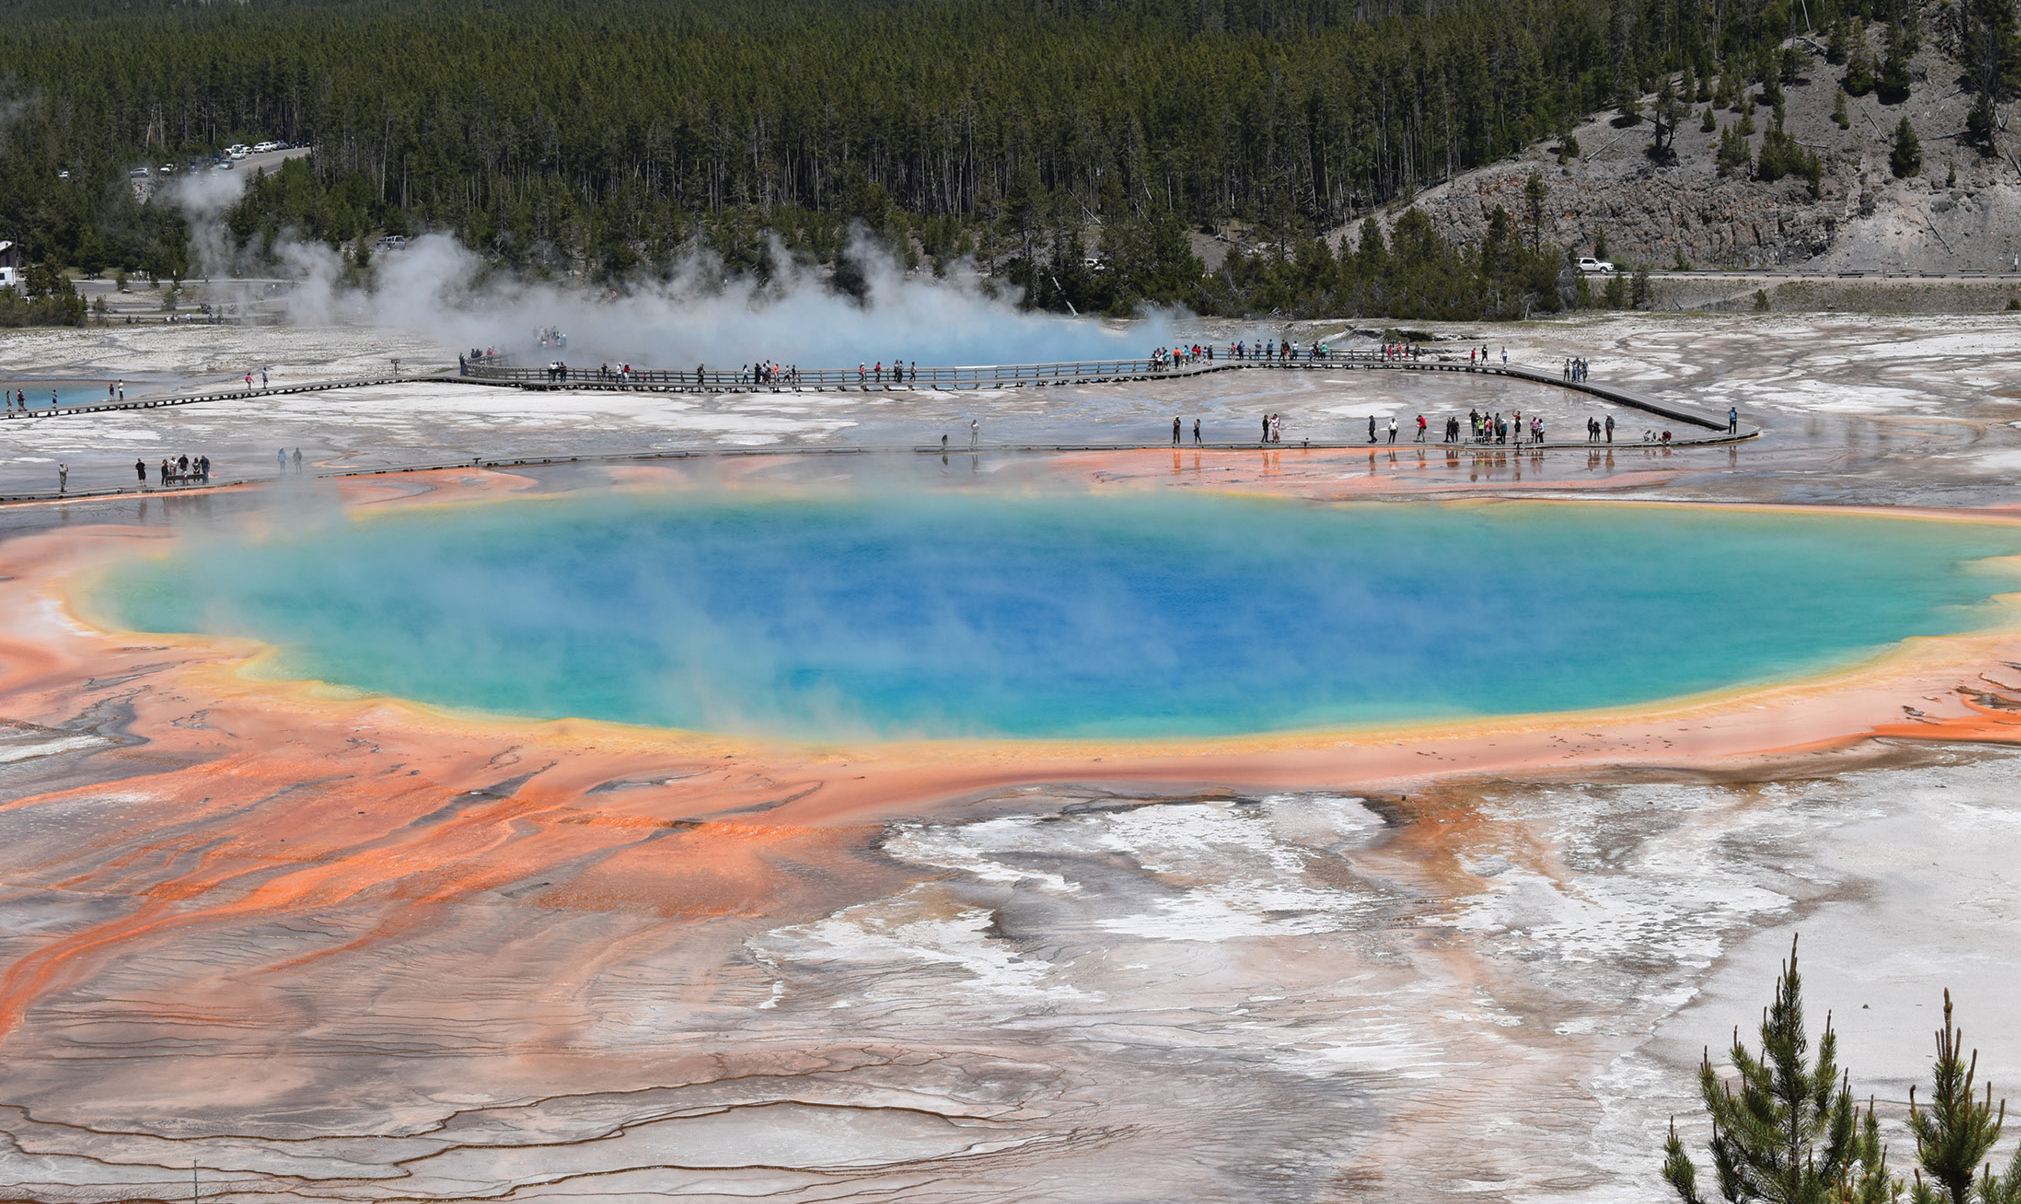 |	FIGURE 1: The Grand Prismatic Hot Spring is the largest, most photographed hot spring in Yellowstone National Park. The distinct bands of color provide evidence that different species of thermophiles (heat-loving microorganisms) call Grand Prismatic home. 